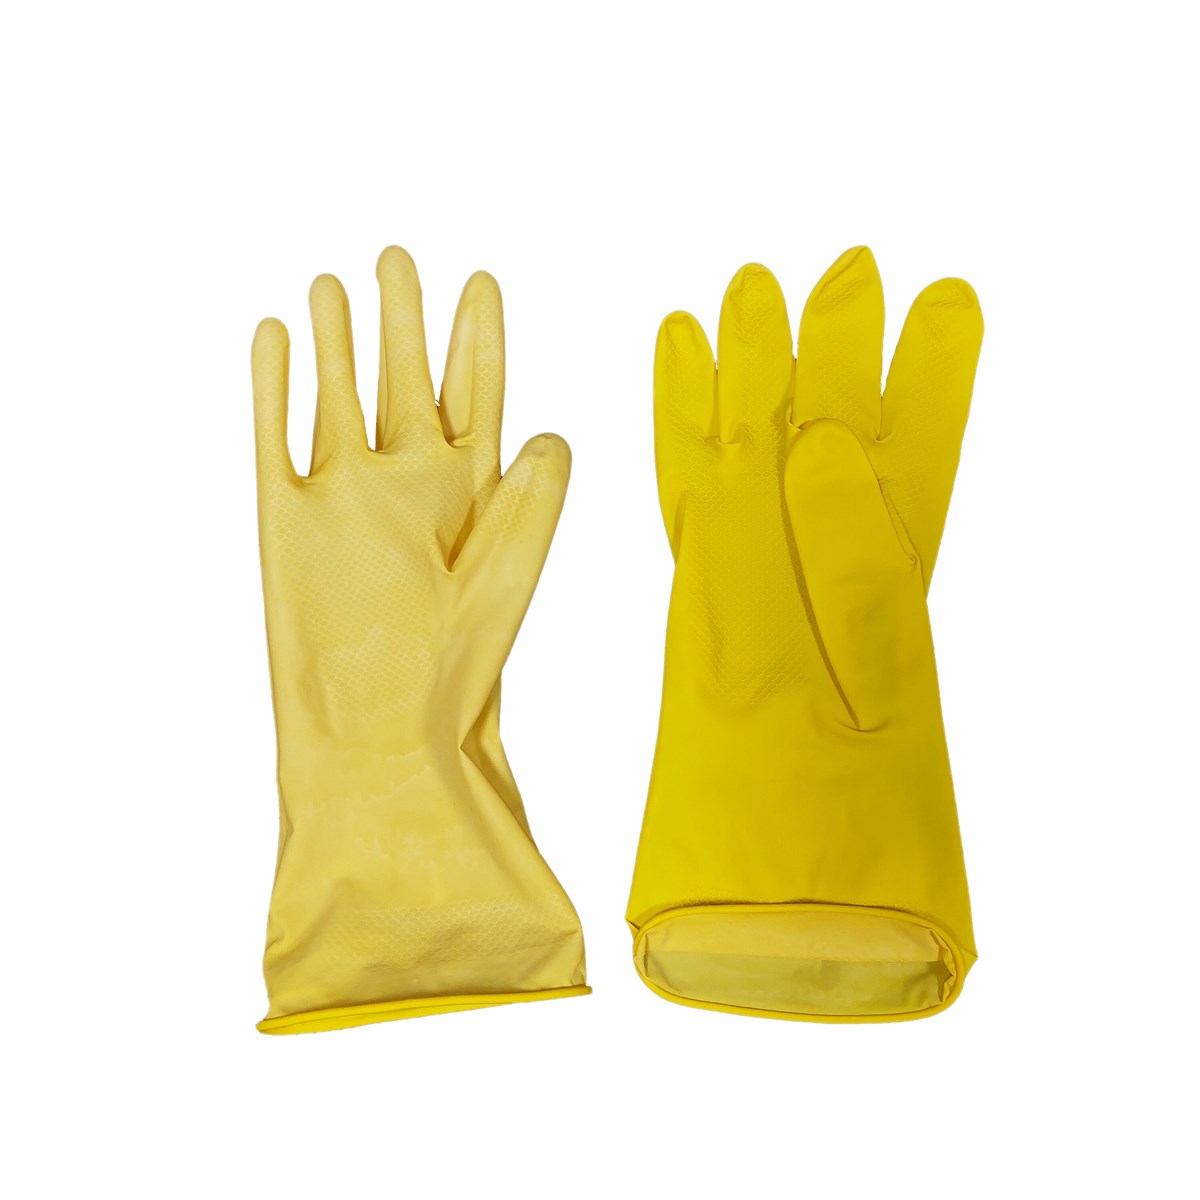 high quality household medical examination sterile safety working rubber latex gloves